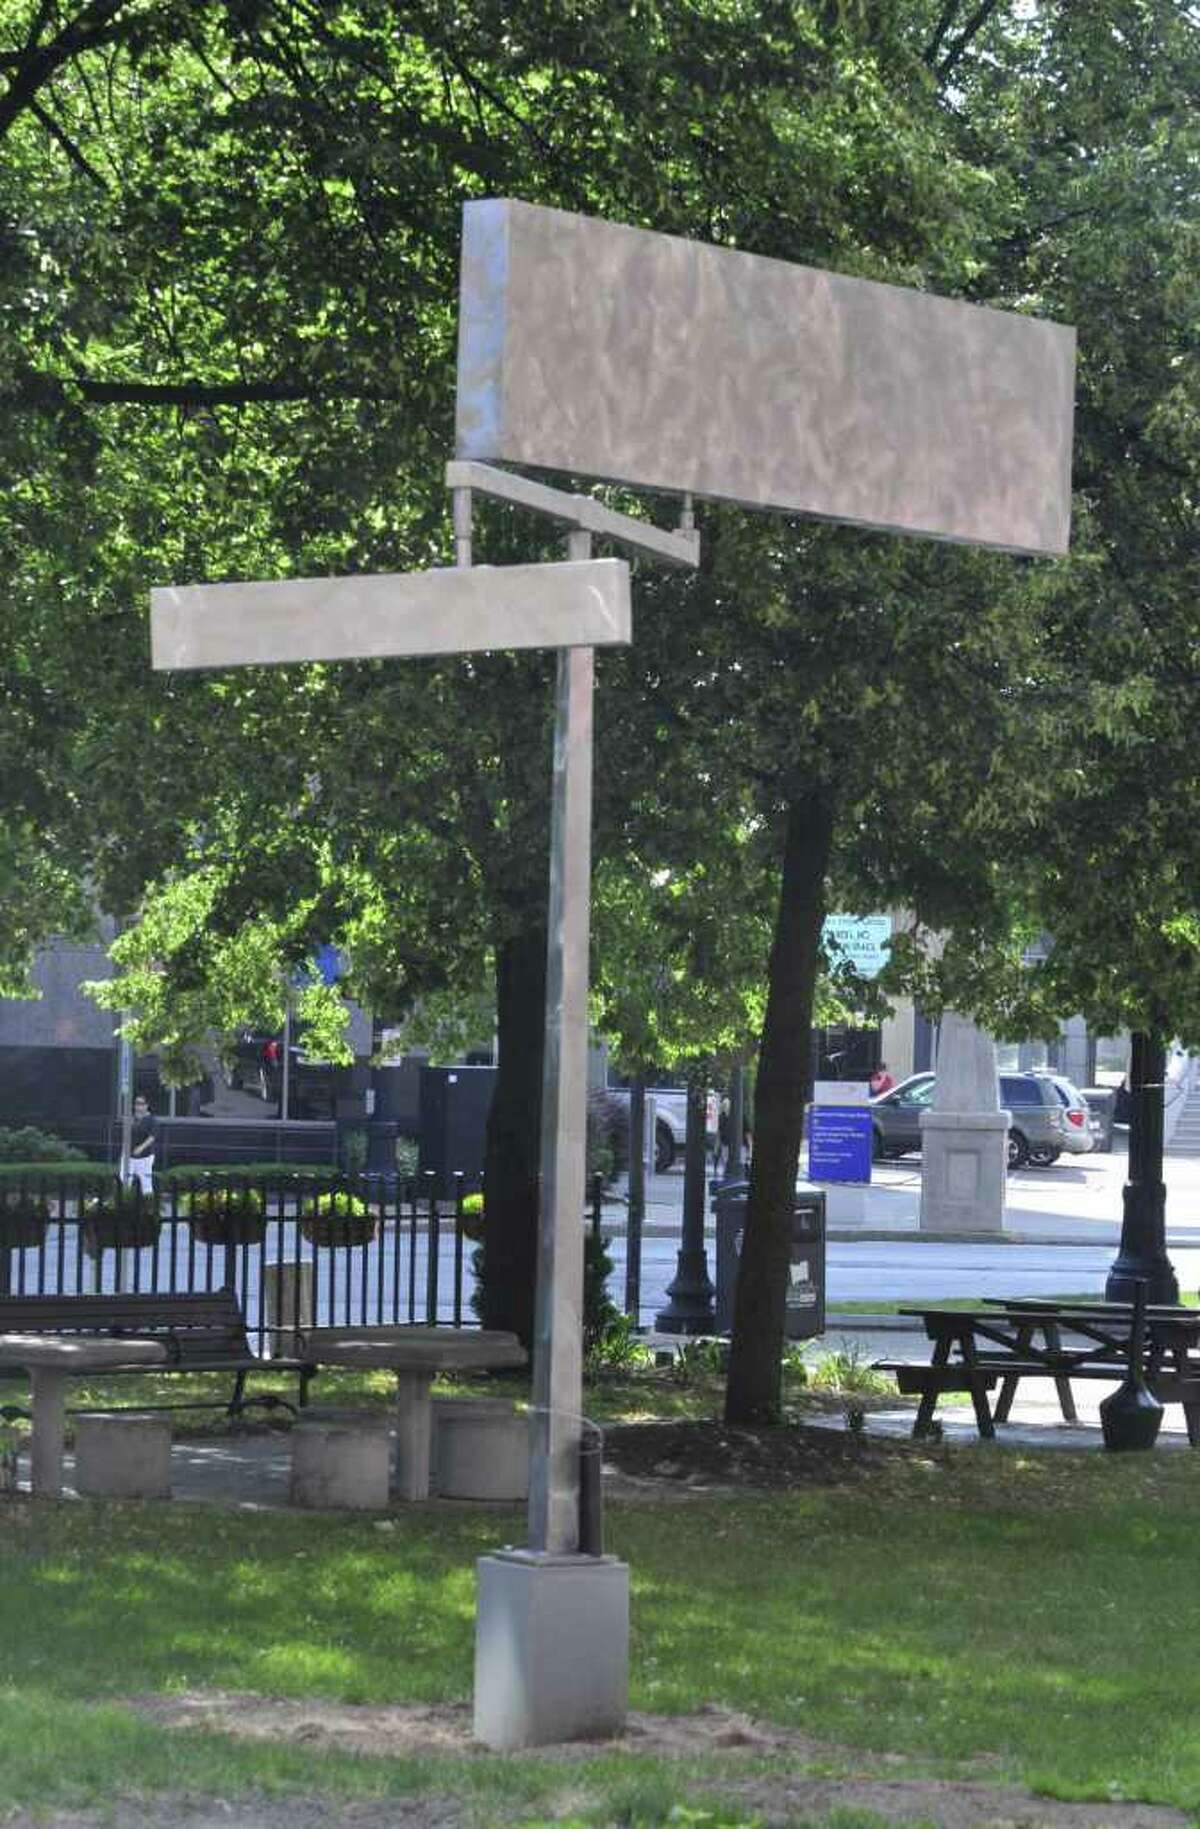 George Rickey sculpture "Rectangles Horizontal Jointed, Big, Thin, Small " Year: 1990, Licensed by VAGA, SIS Location: Maiden Lane Park, sponsored by Downtown Albany Business Improvement District in Albany, NY, June 17, 2011. (Michael P. Farrell/Times Union)